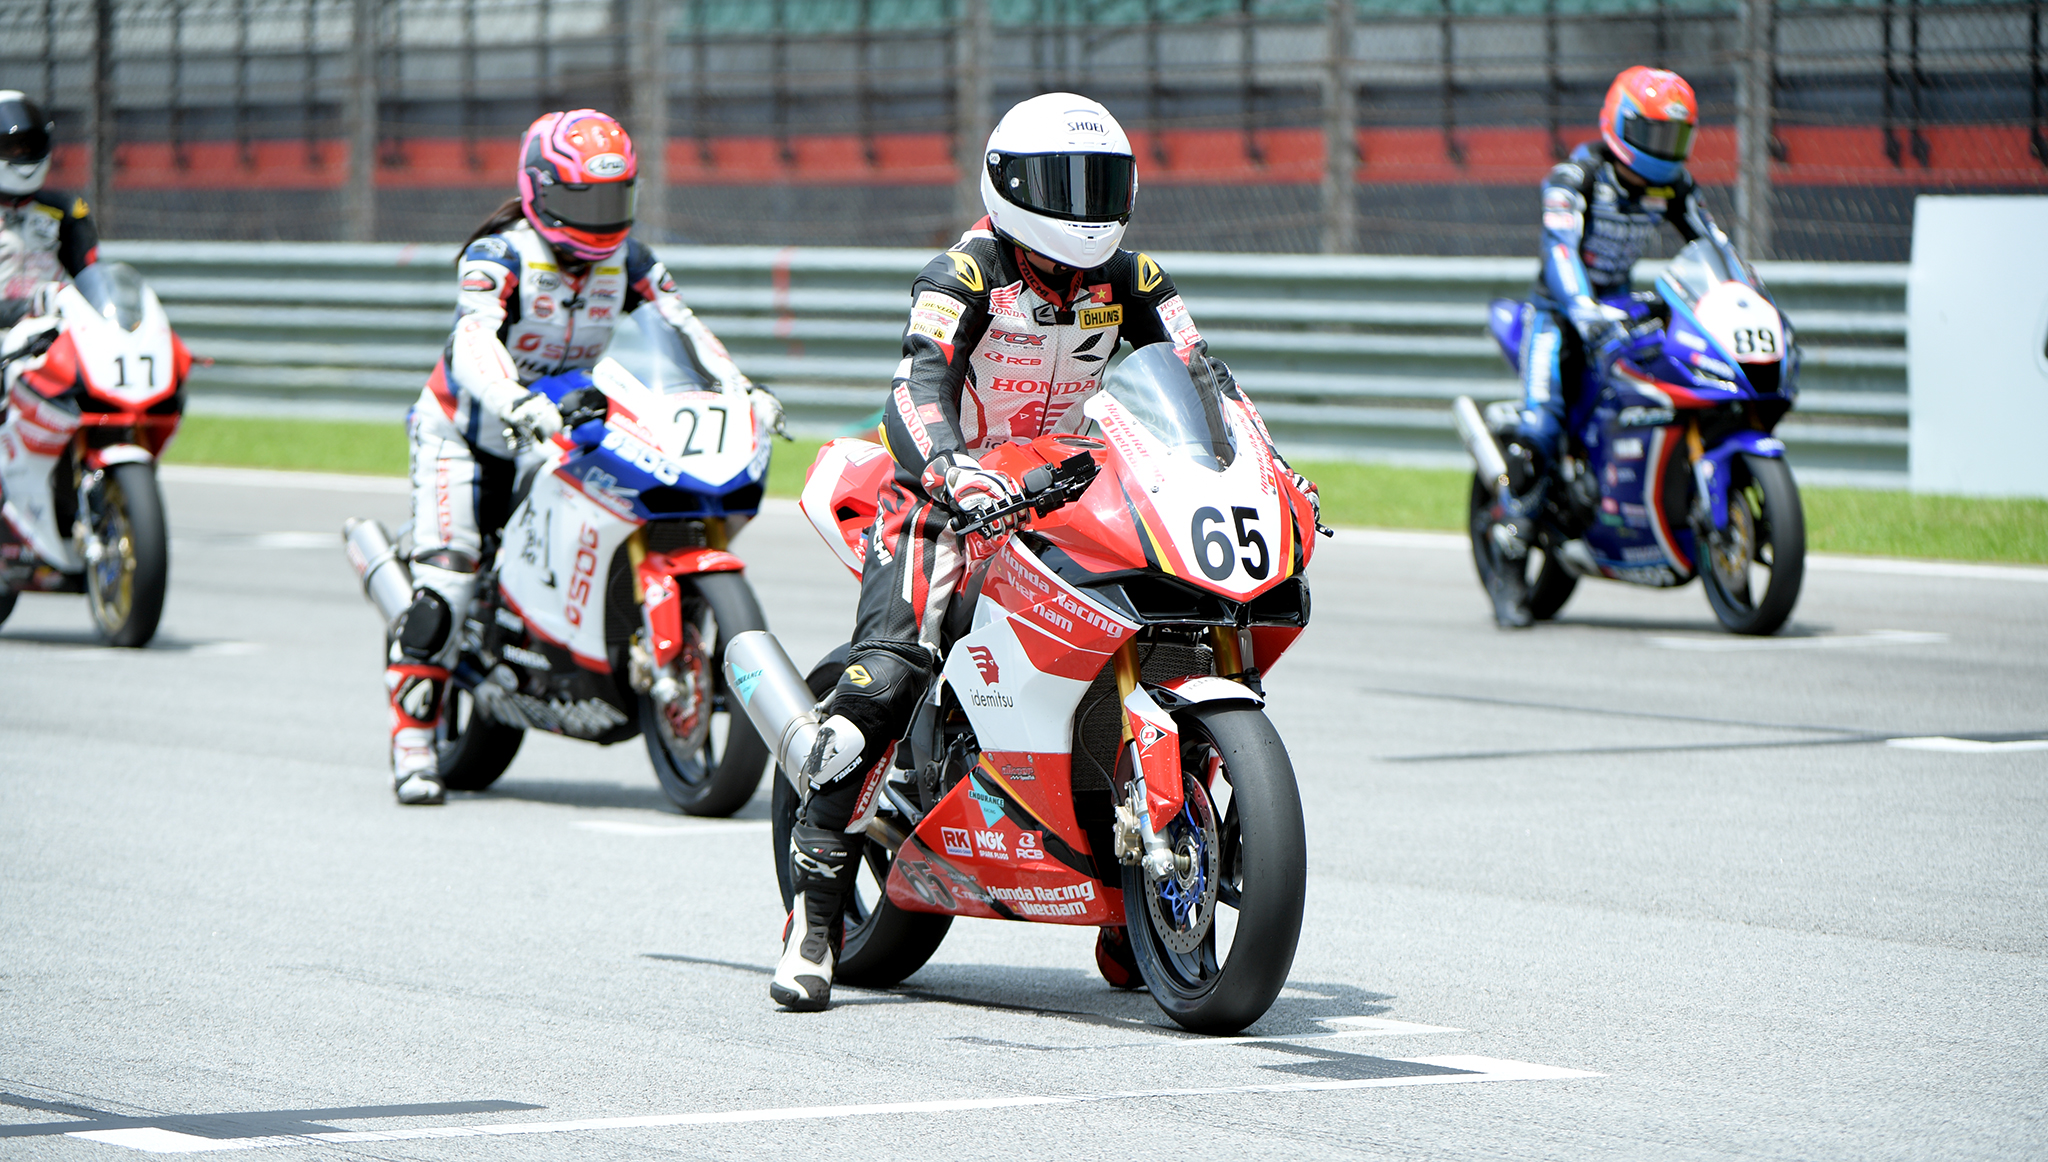 Race 1 Results Stage 2 ARRC 2023: Nguyễn Anh Tuấn surprised with a top 10 finish - arrc-2023-race1-02.jpg